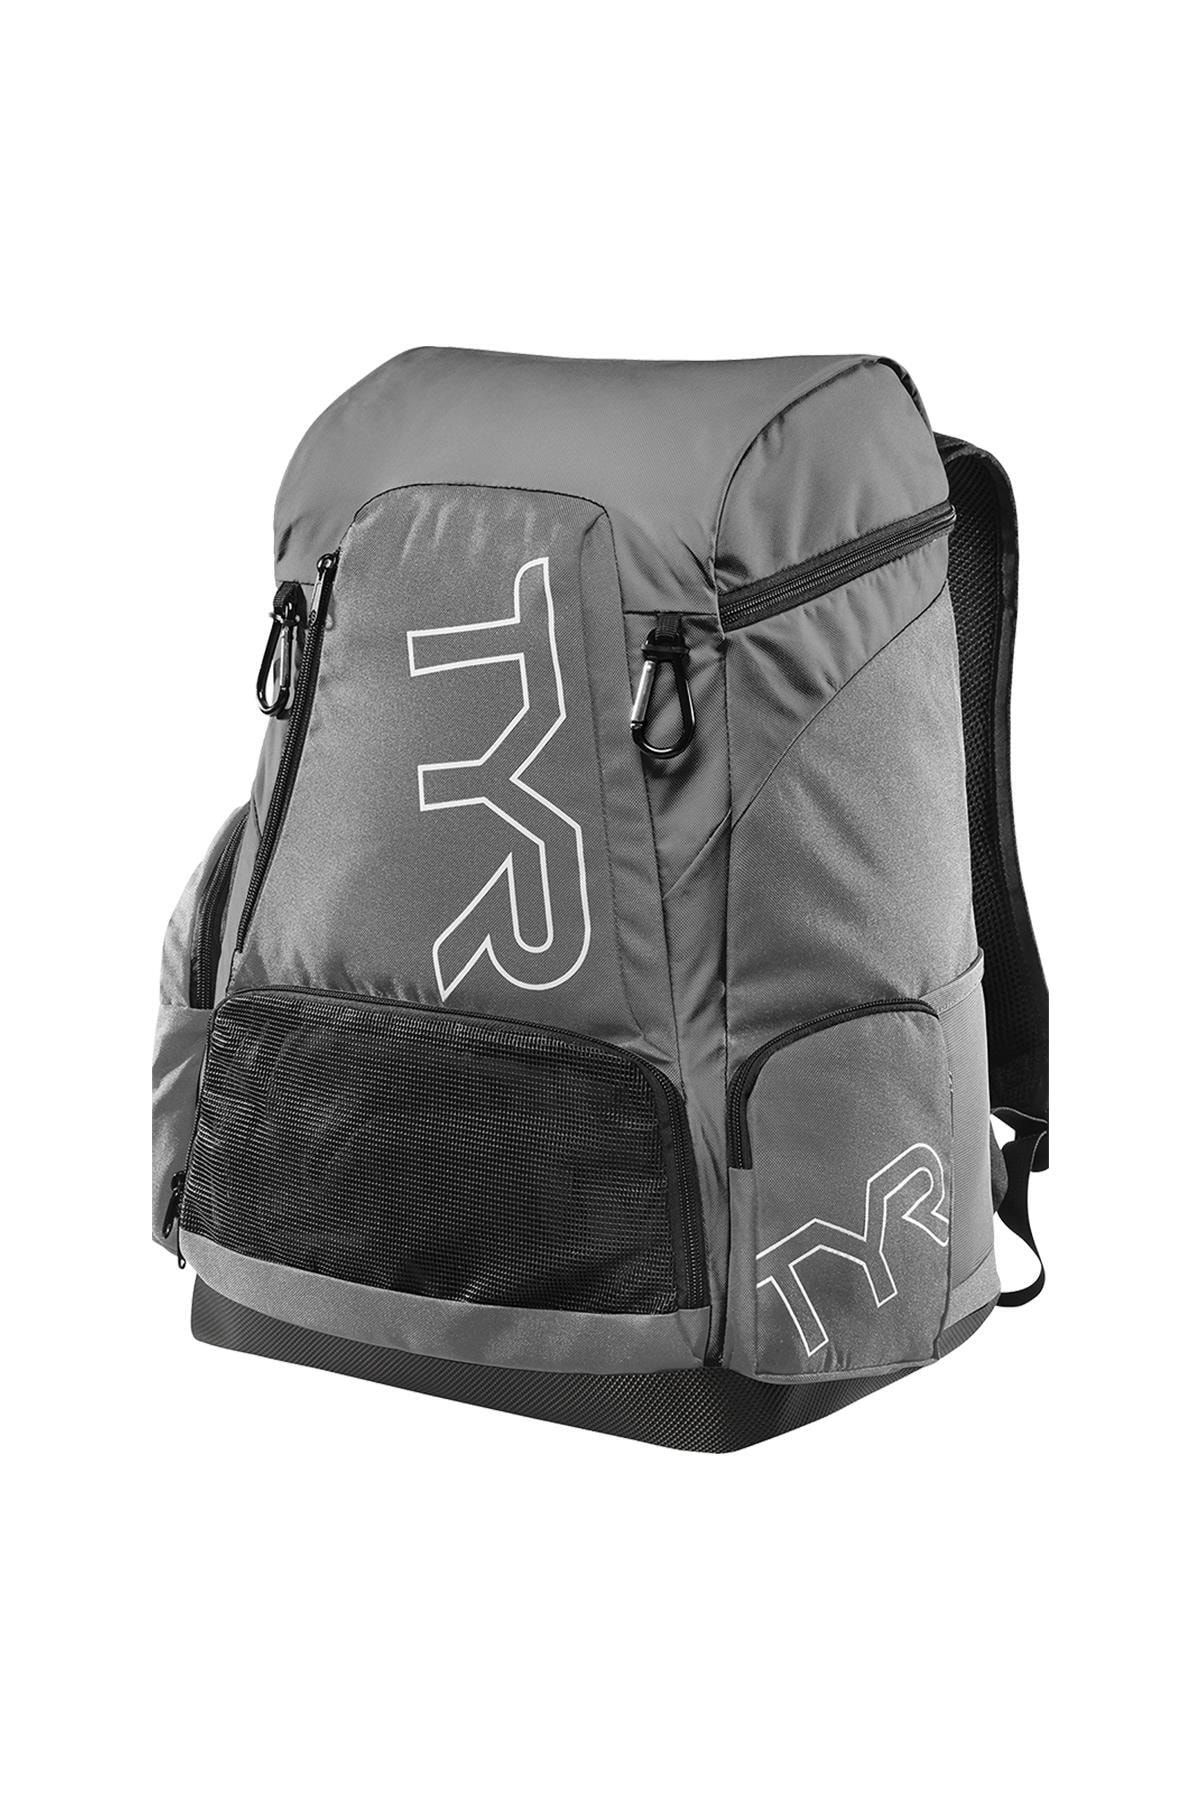 TYR Sport Backpack - Gray - Solid color